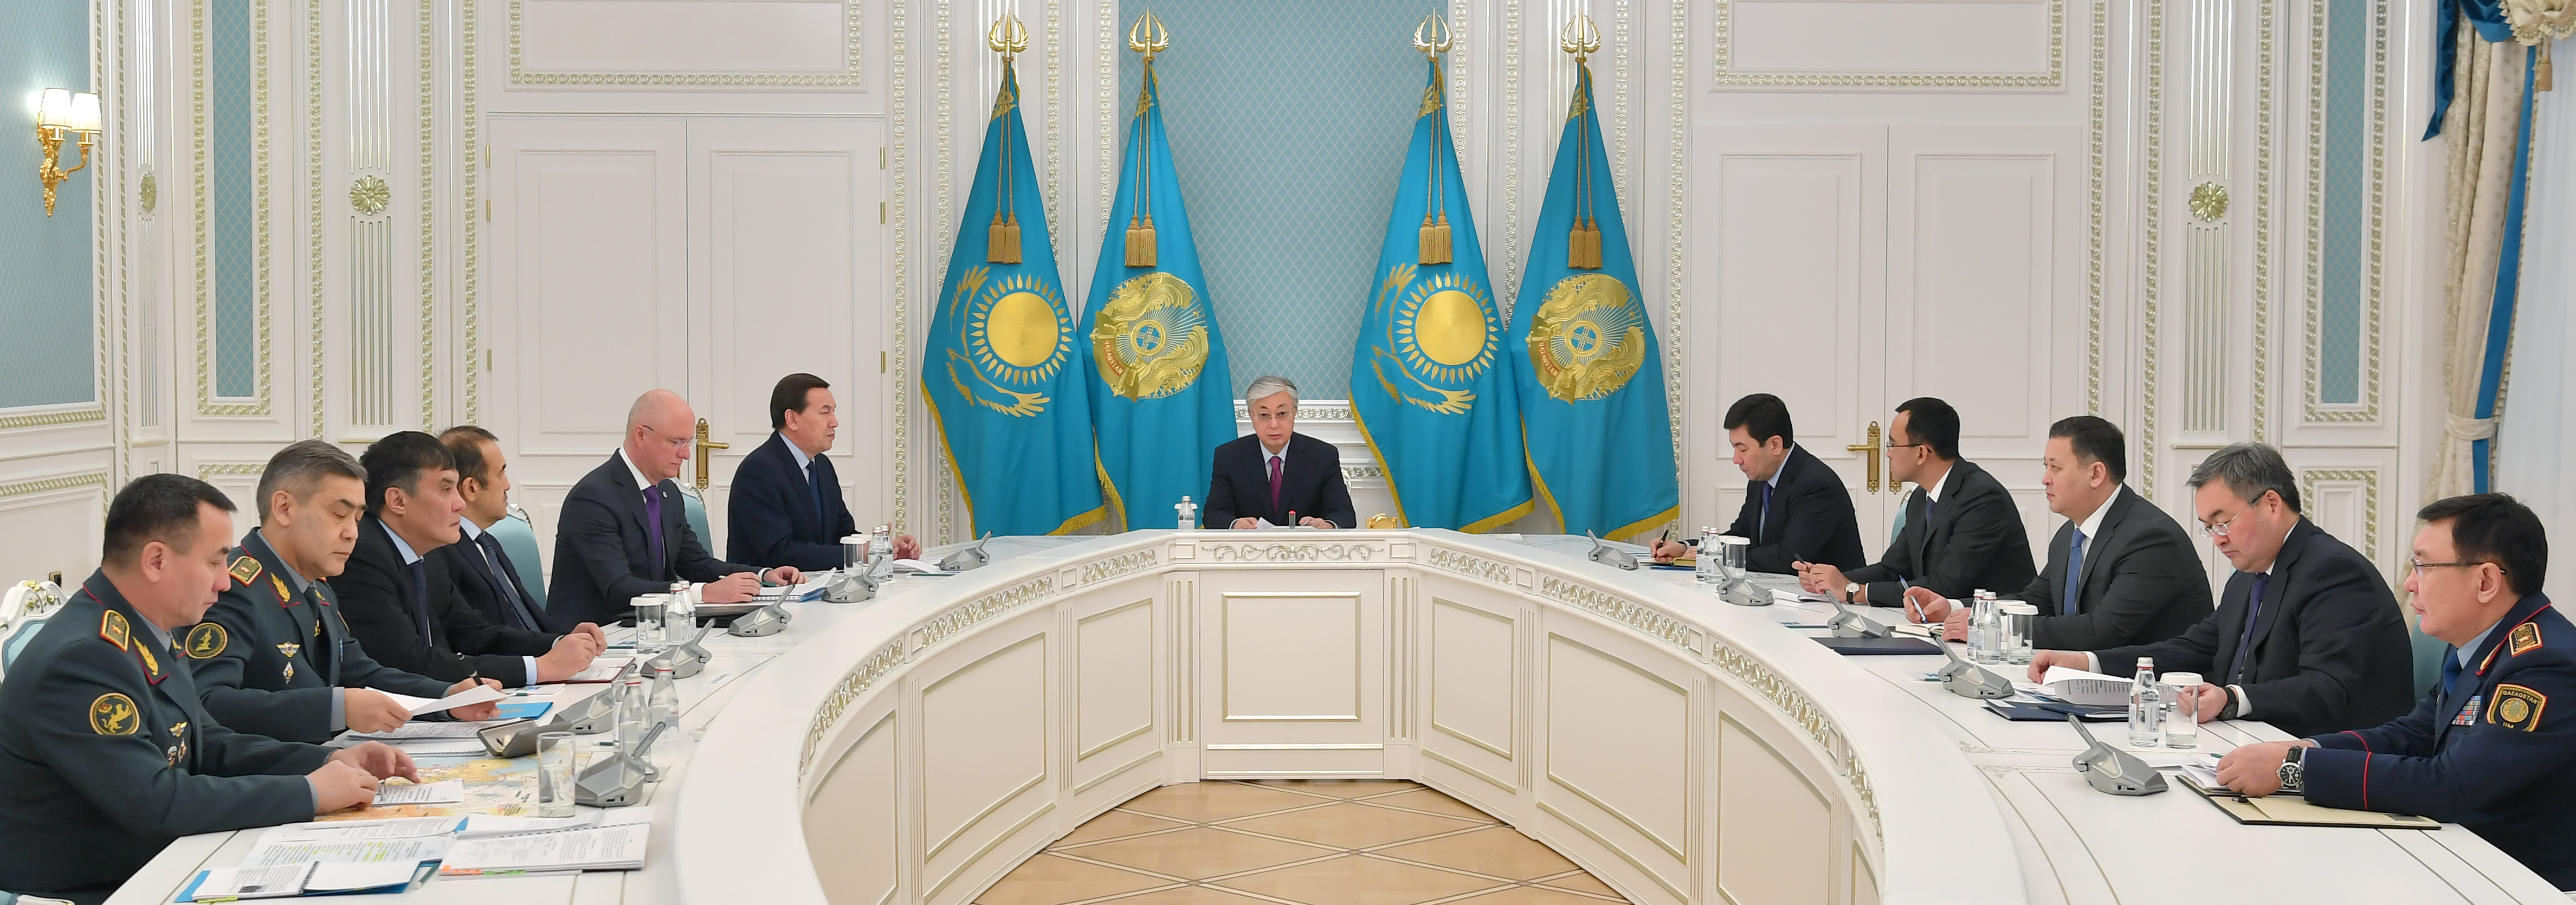 Kassym-Jomart Tokayev held a meeting on the situation in the Persian Gulf